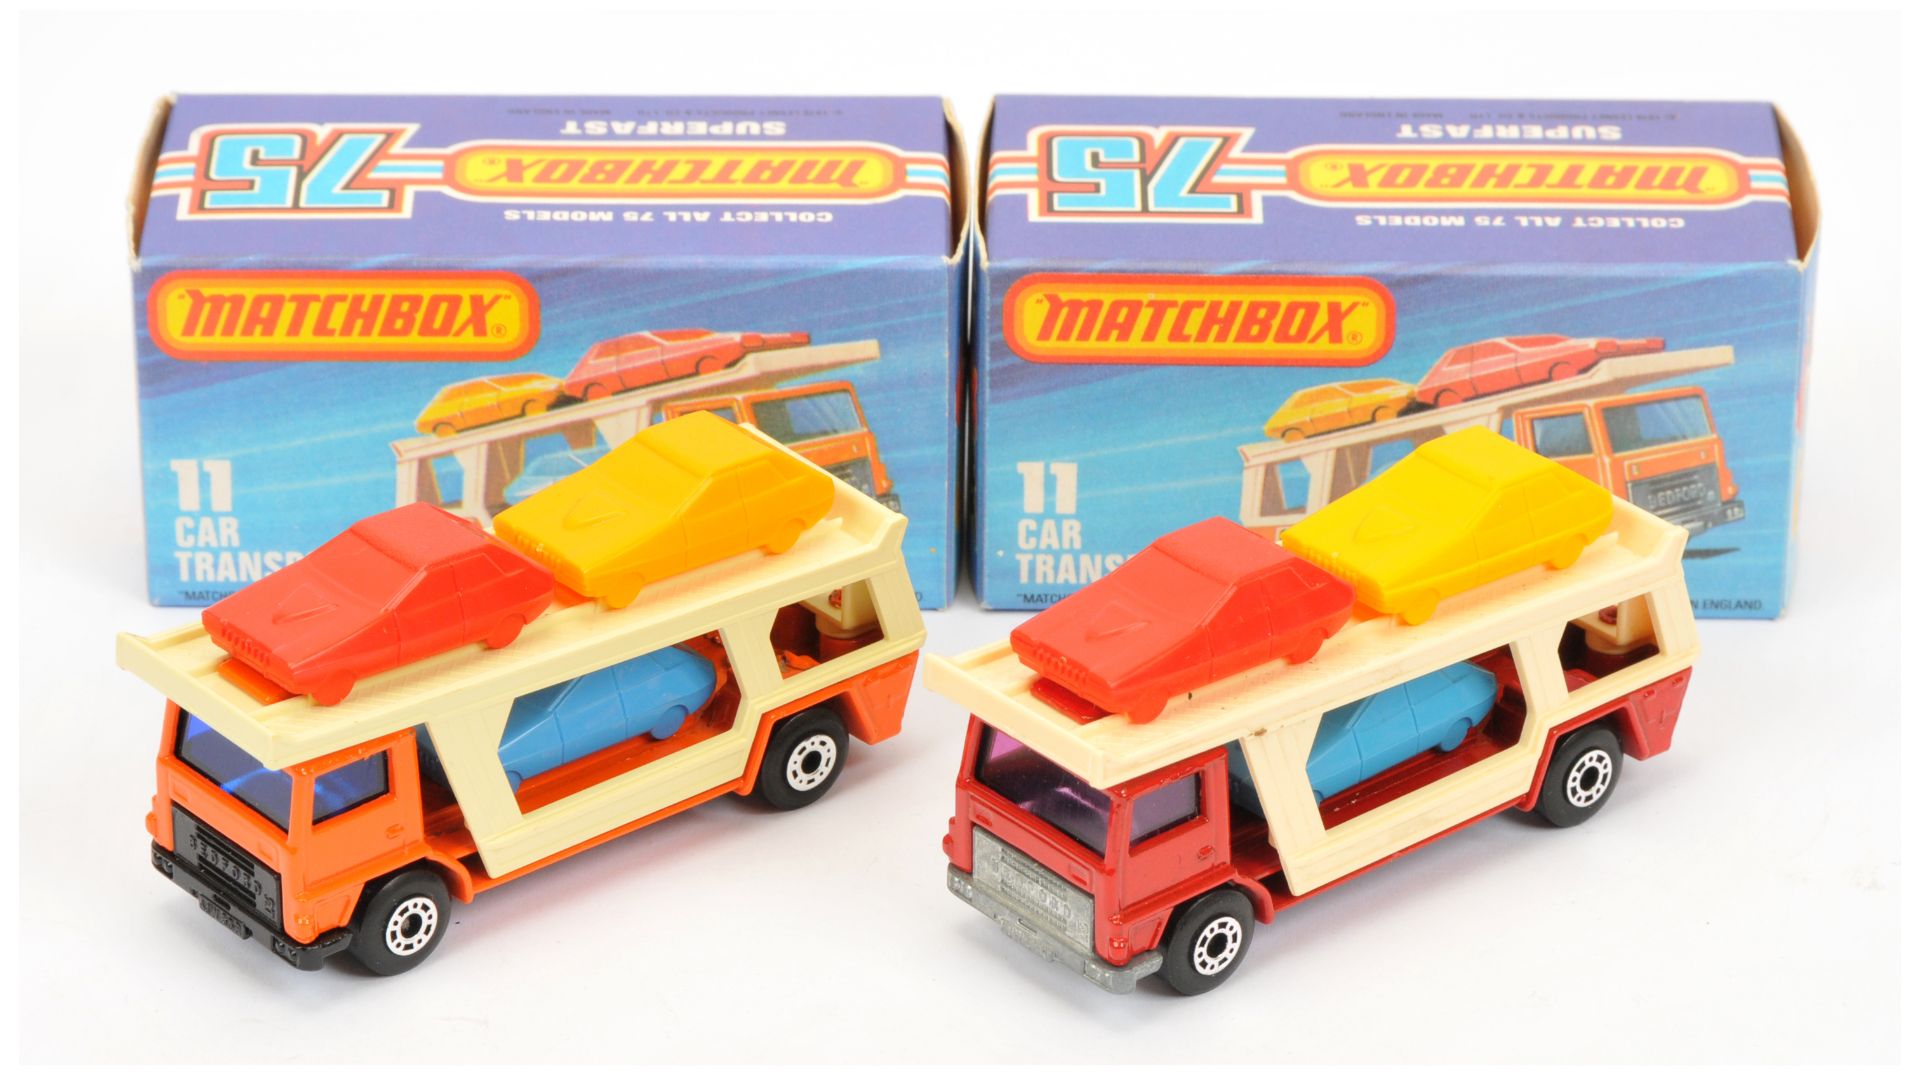 Matchbox Superfast 11c Car Transporter - RARE Red body, cream plastic back with blue, yellow and ...